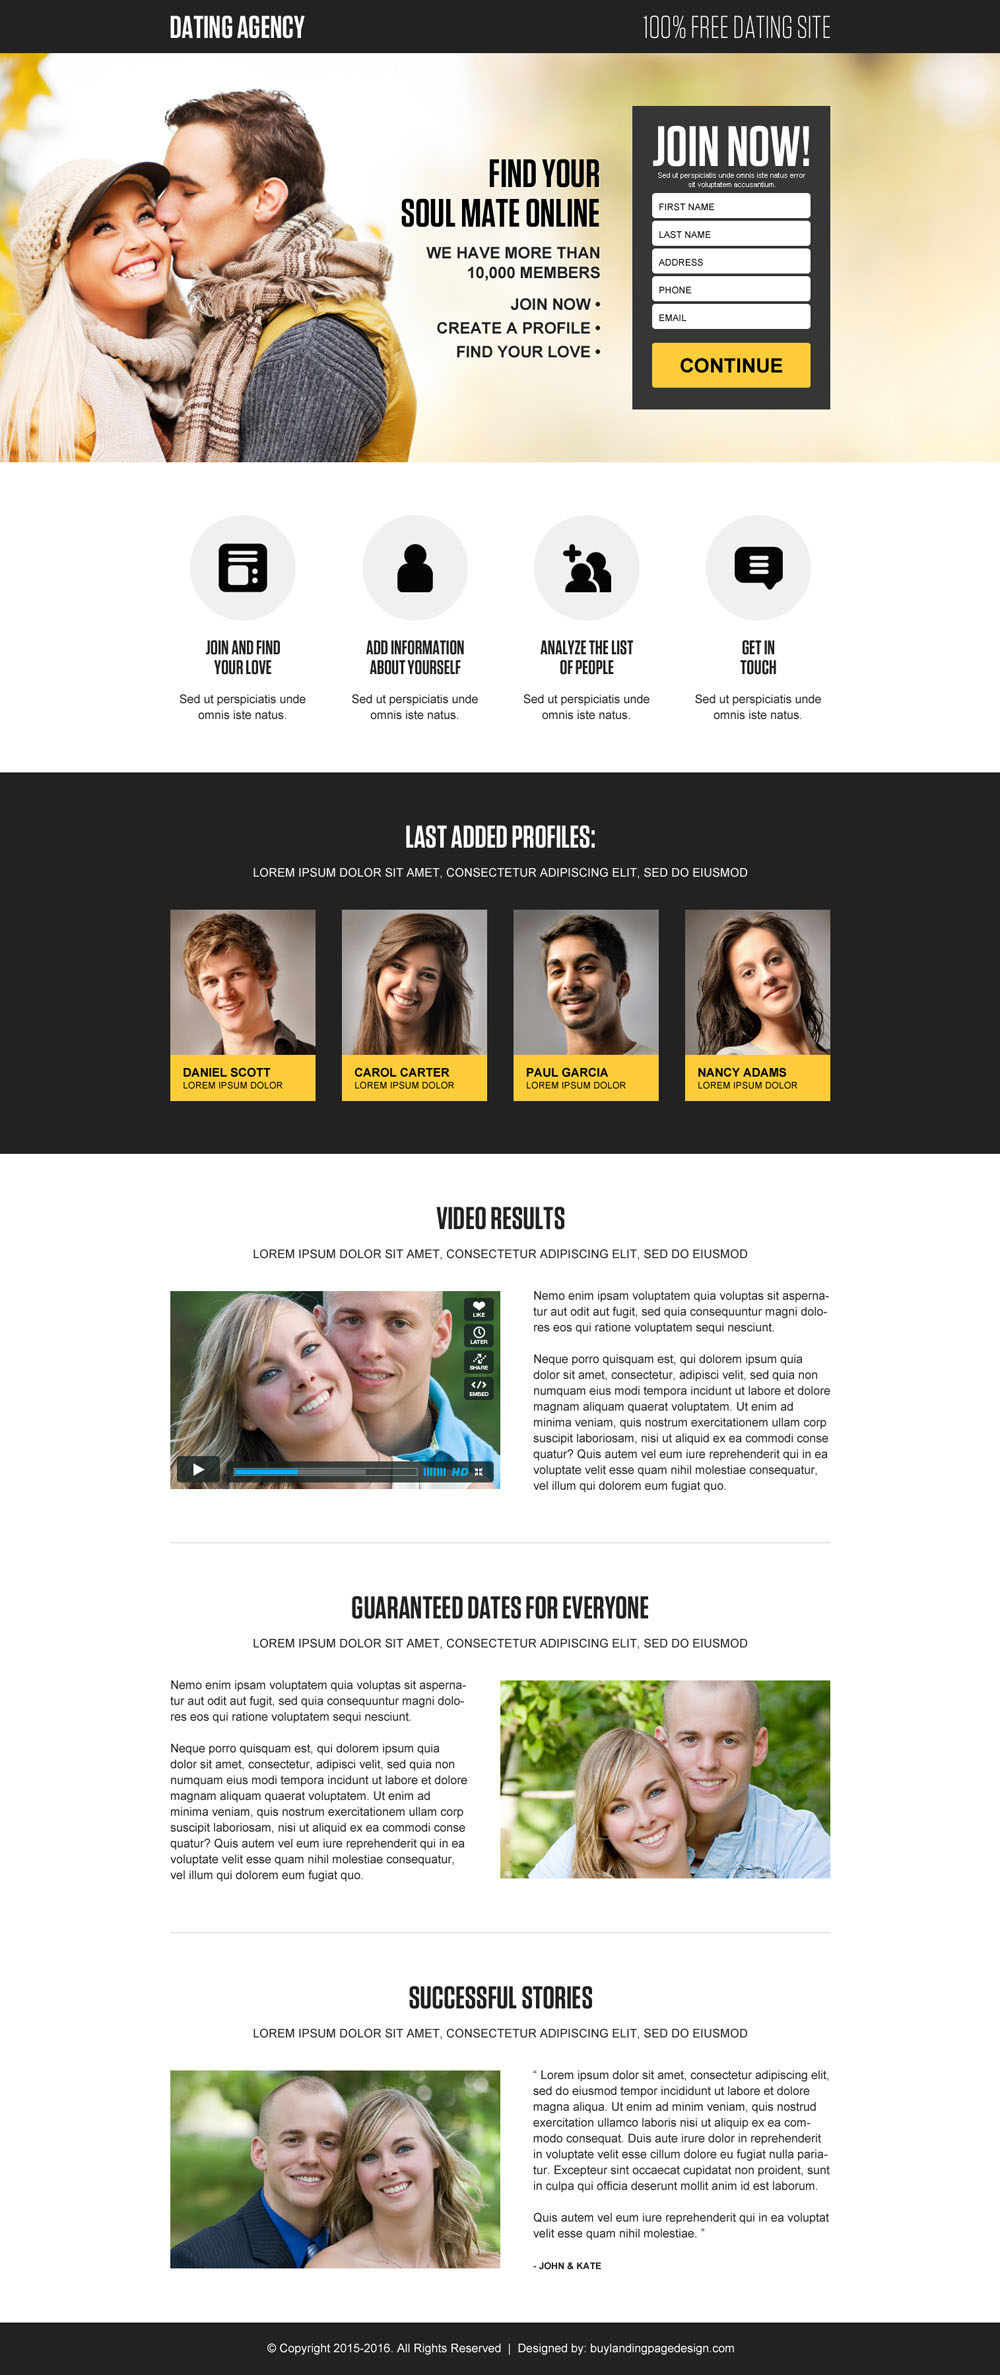 free-online-dating-site-leads-generation-landing-page-design-028